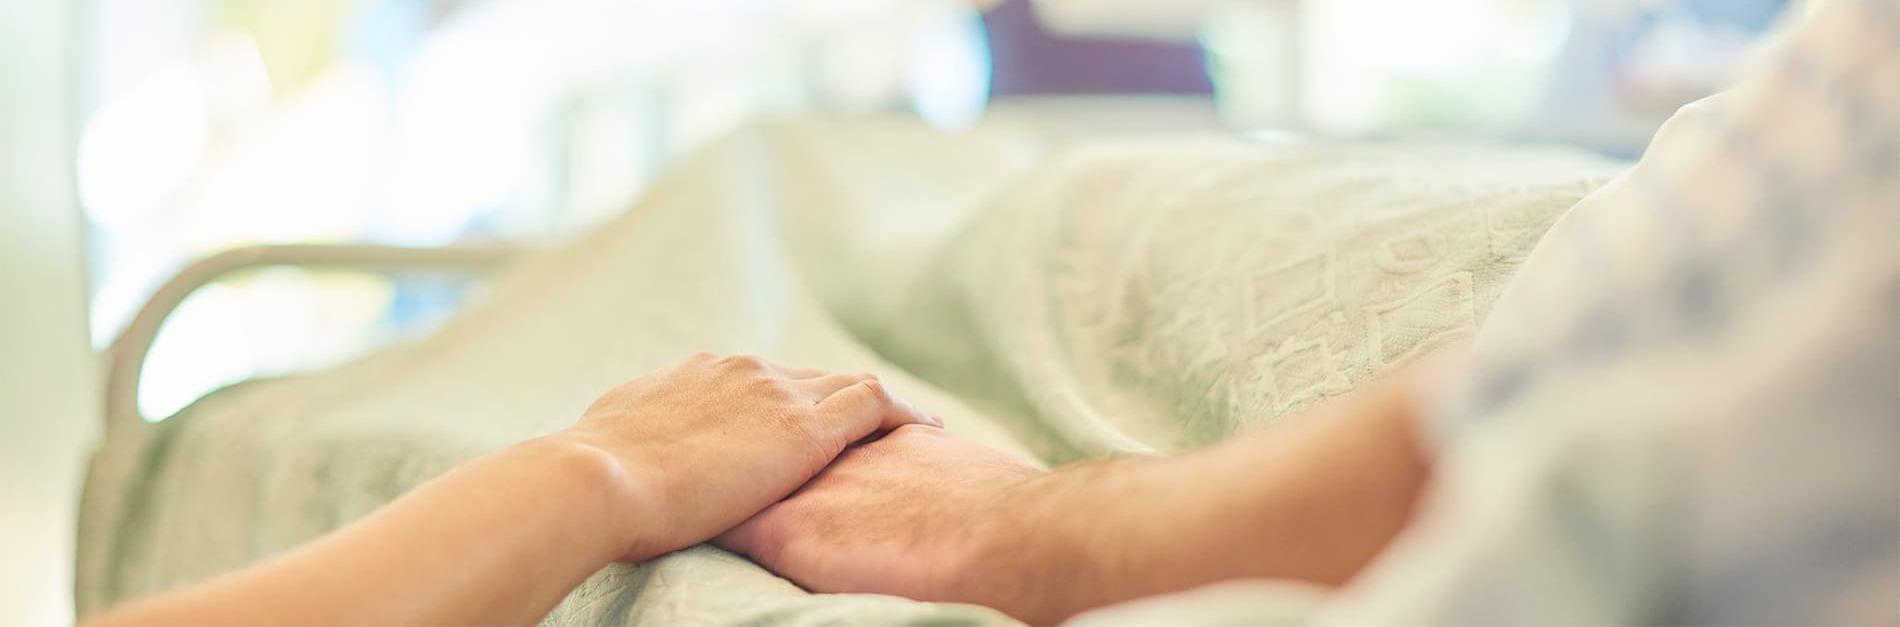 Holding hands with a patient in a hospital bed